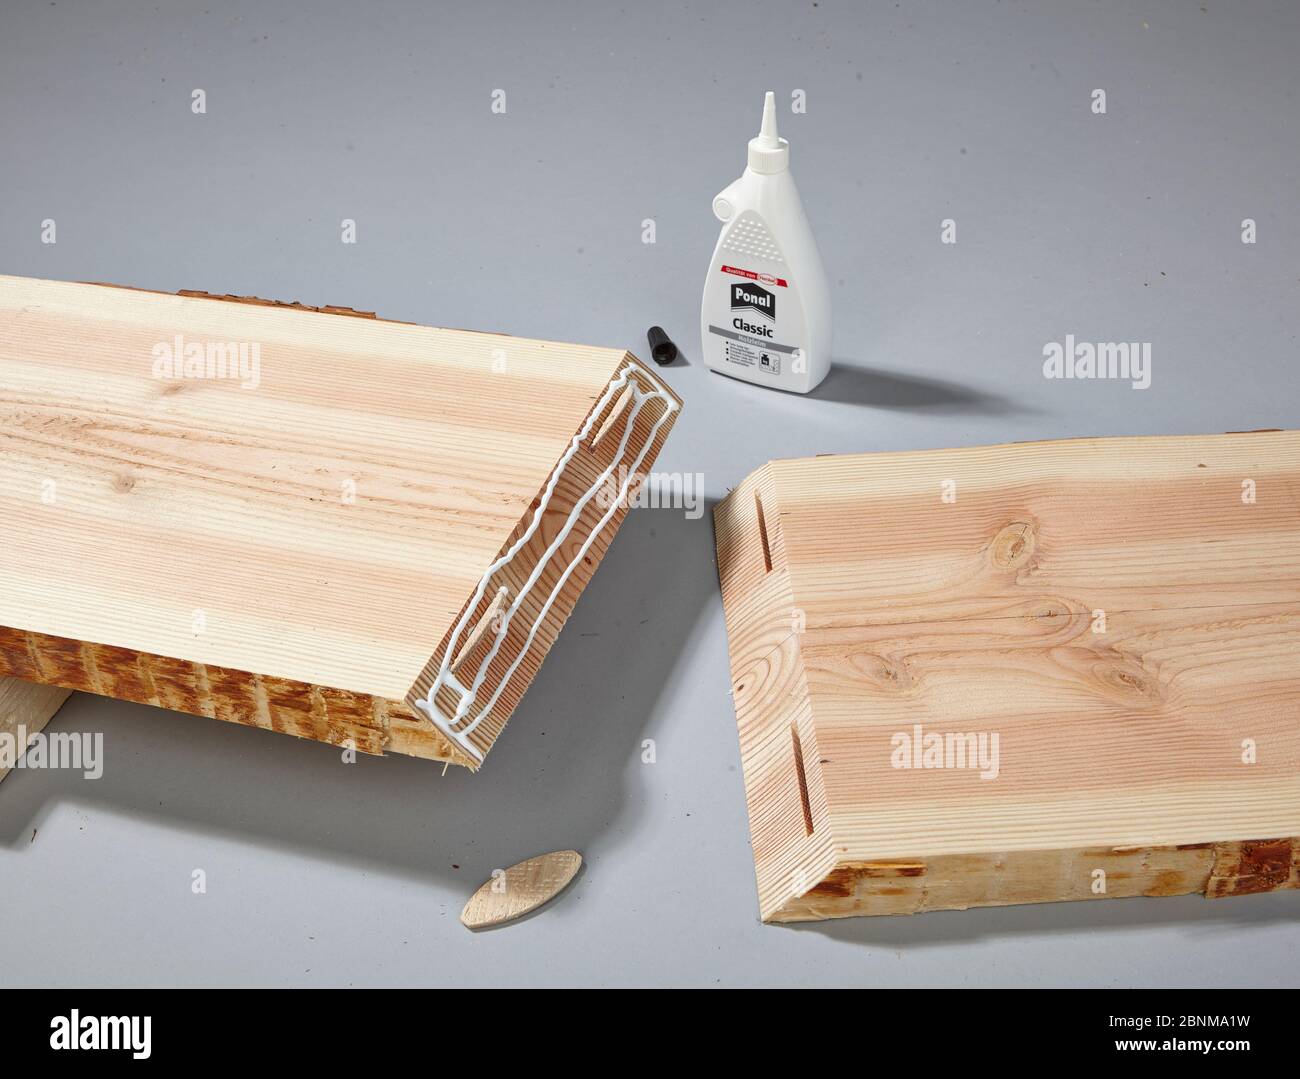 Construction of a wooden shelf, do-it-yourself production, step-by-step, step 6 applying glue and one-sided insertion of the flat dowels into the previously milled grooves Stock Photo